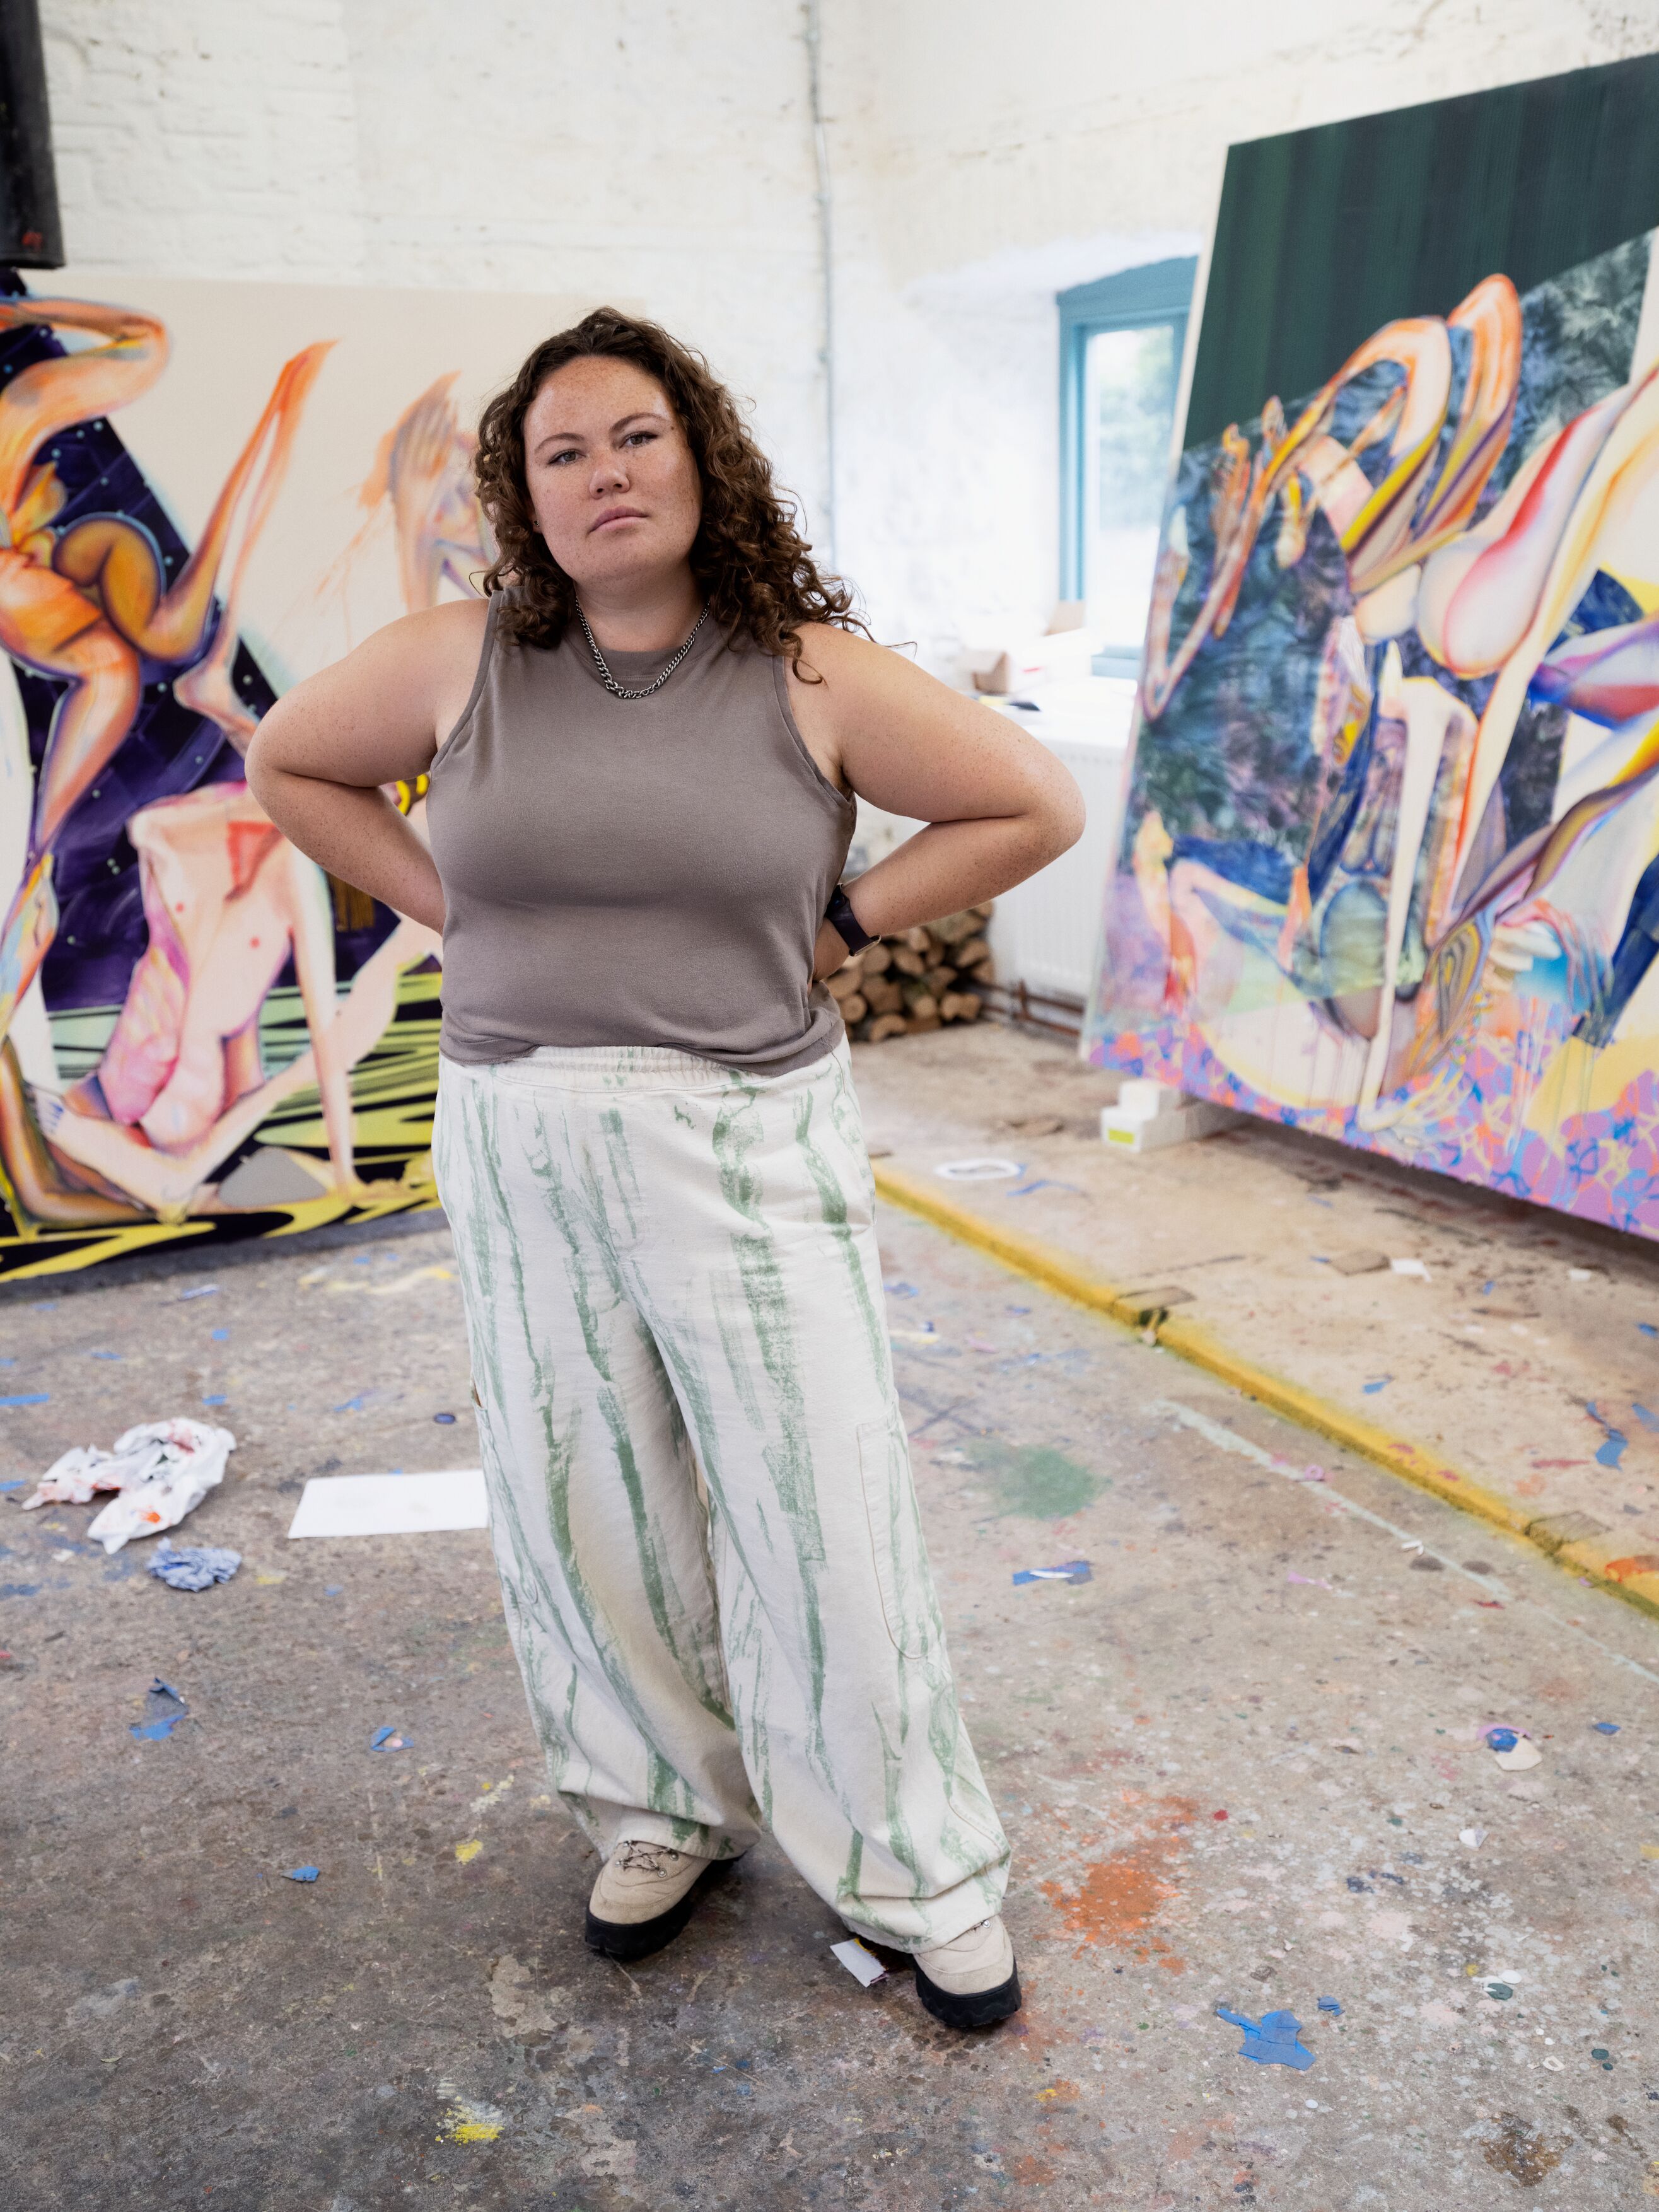 Artist Christina Quarles on Her Upcoming Hauser and Wirth Show